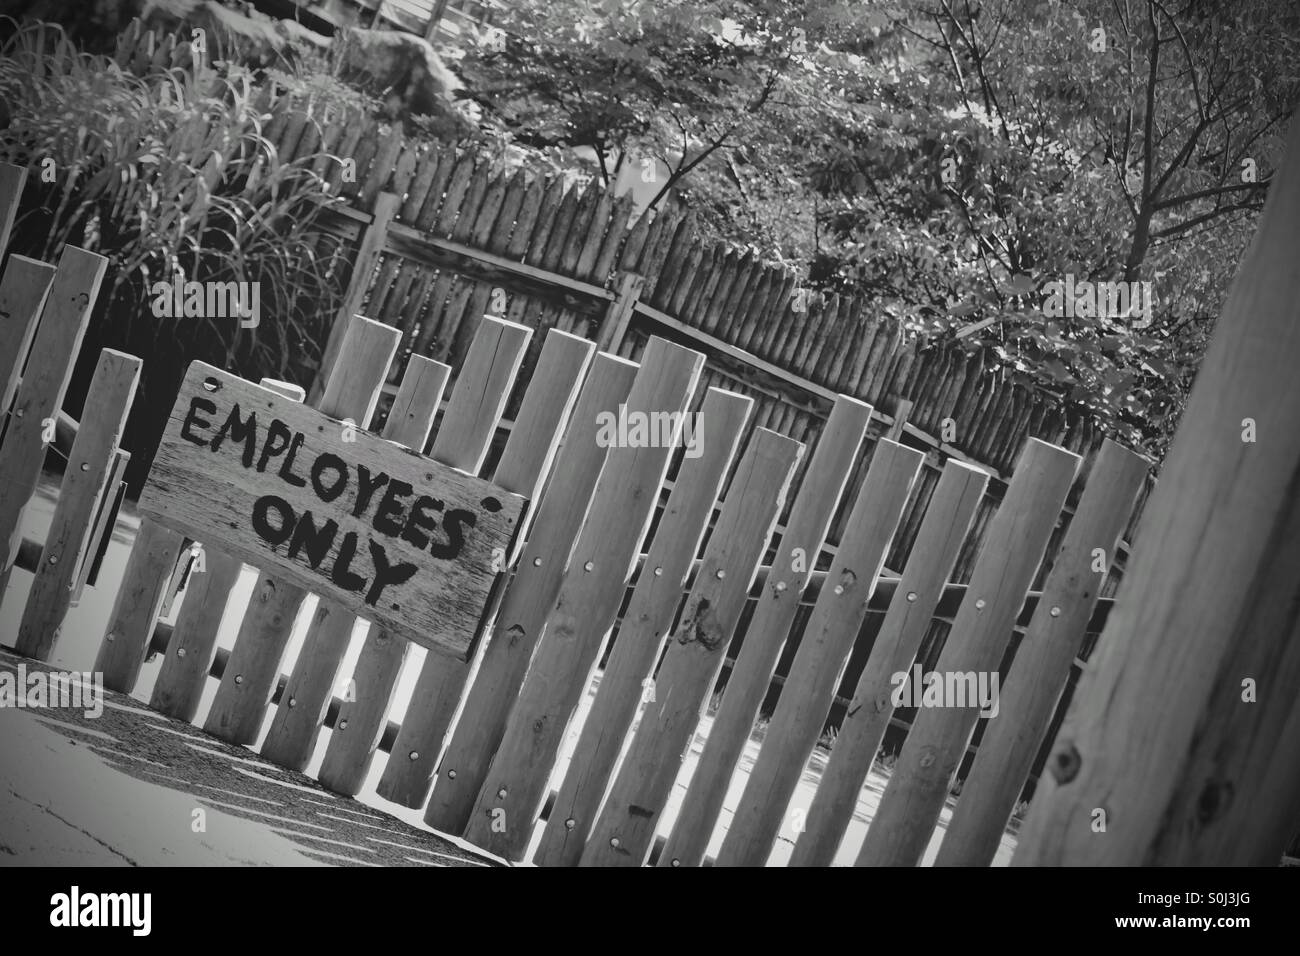 'Employees Only' sign along a bamboo fence at a zoo in Grand Rapids, Michigan Stock Photo